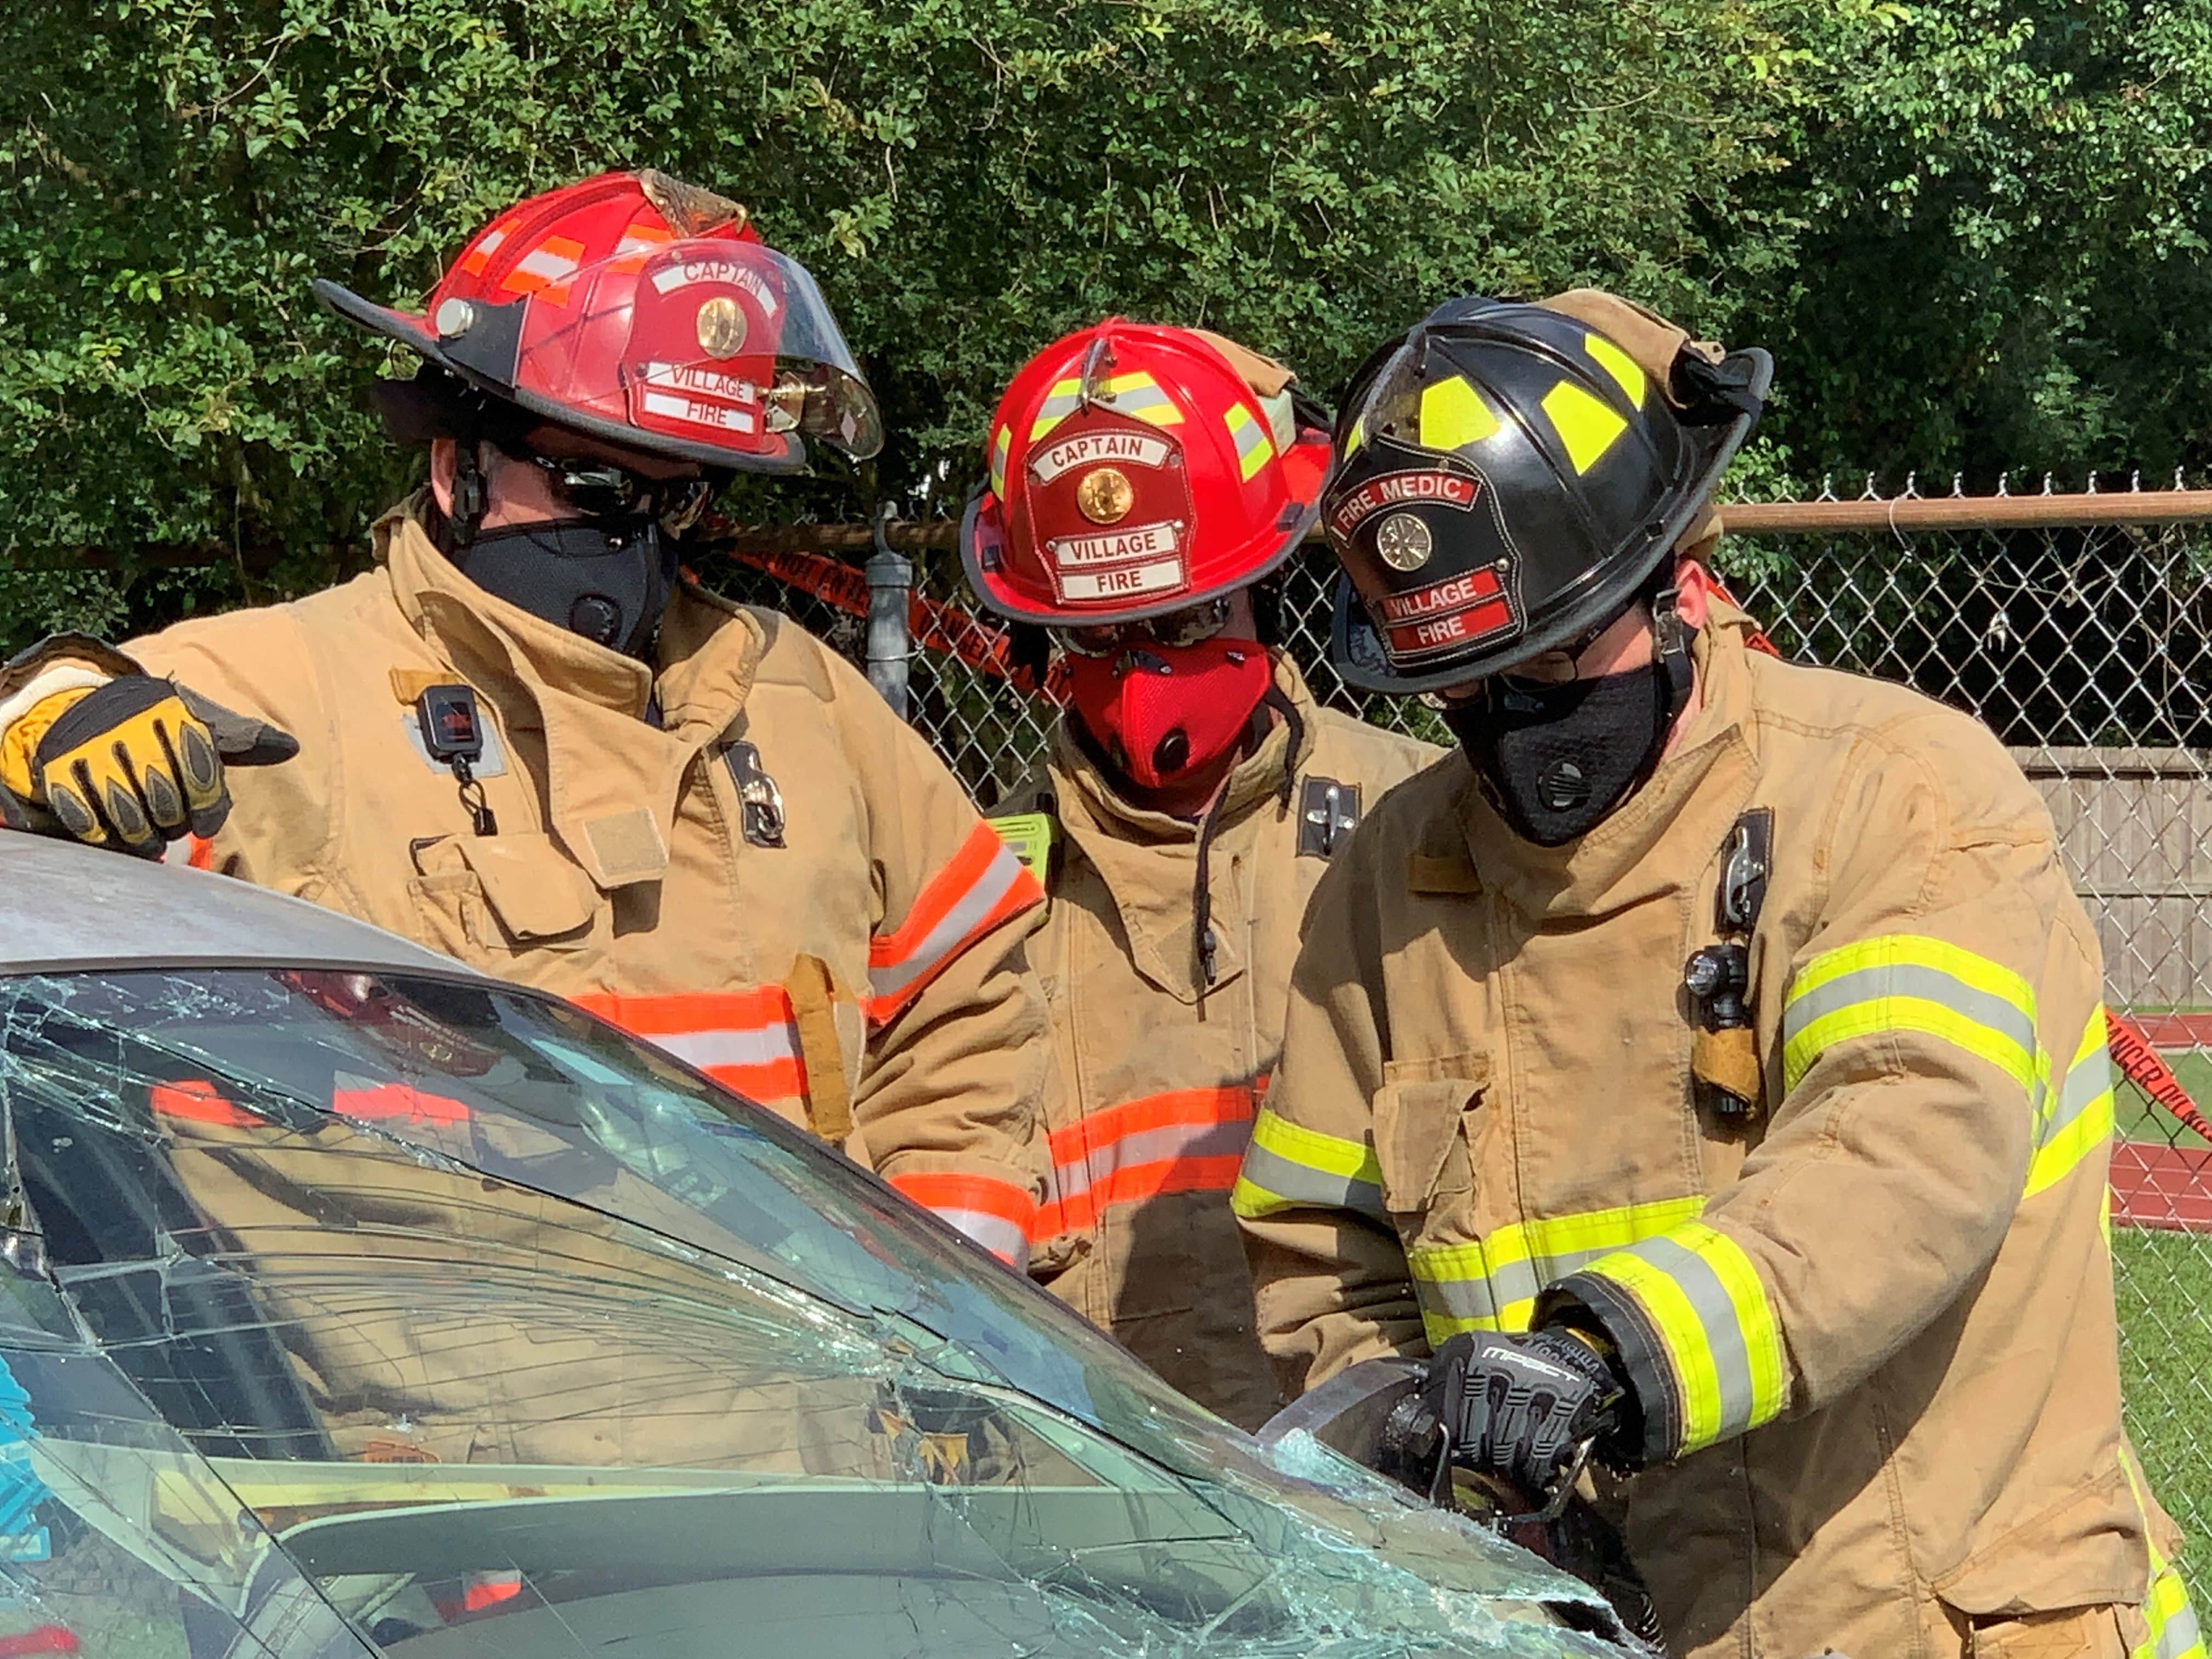 Village Fire Department members wearing the RZ Mask for protection from dust and particulates while practicing car accident rescue.